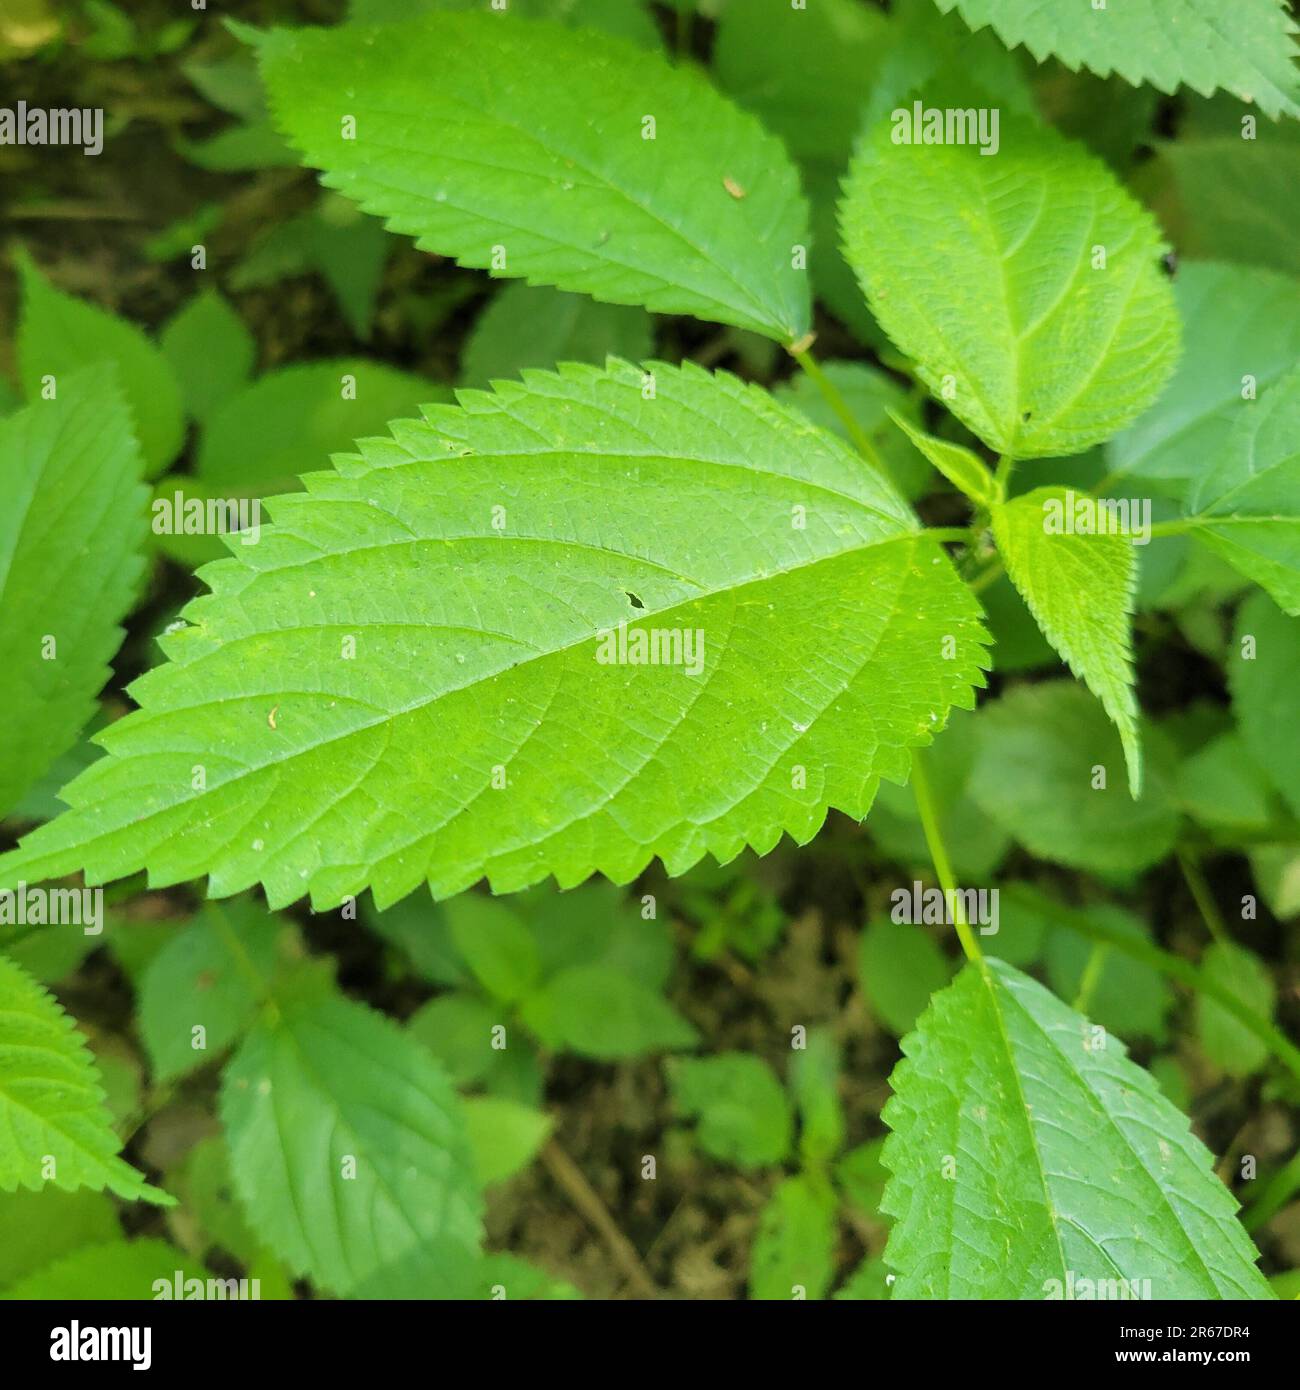 Stinging Nettle, Wood Nettle, Itch Weed, Laportea canadensis, is a perennial, non-woody plant that causes stinging when touched. Edible when young. Stock Photo